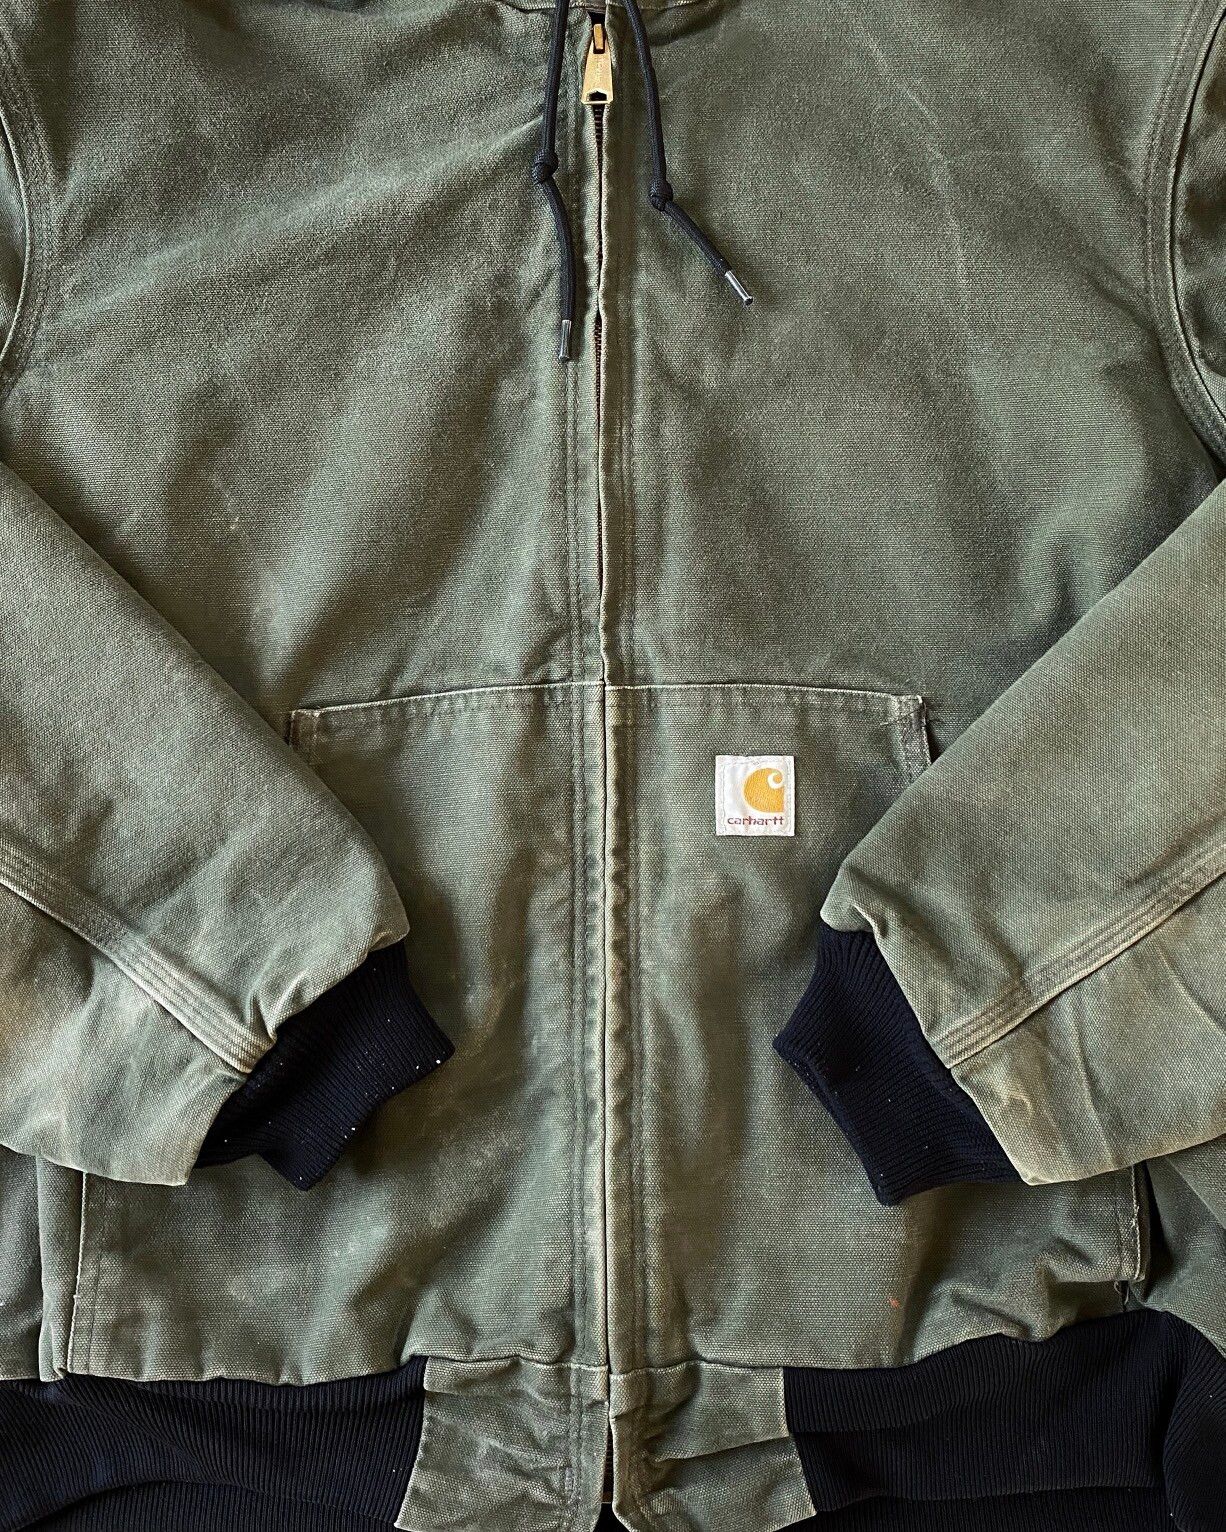 Vintage VINTAGE CARHARTT HOODED ACTIVE JACKET : FOREST GREEN Size US XL / EU 56 / 4 - 3 Preview